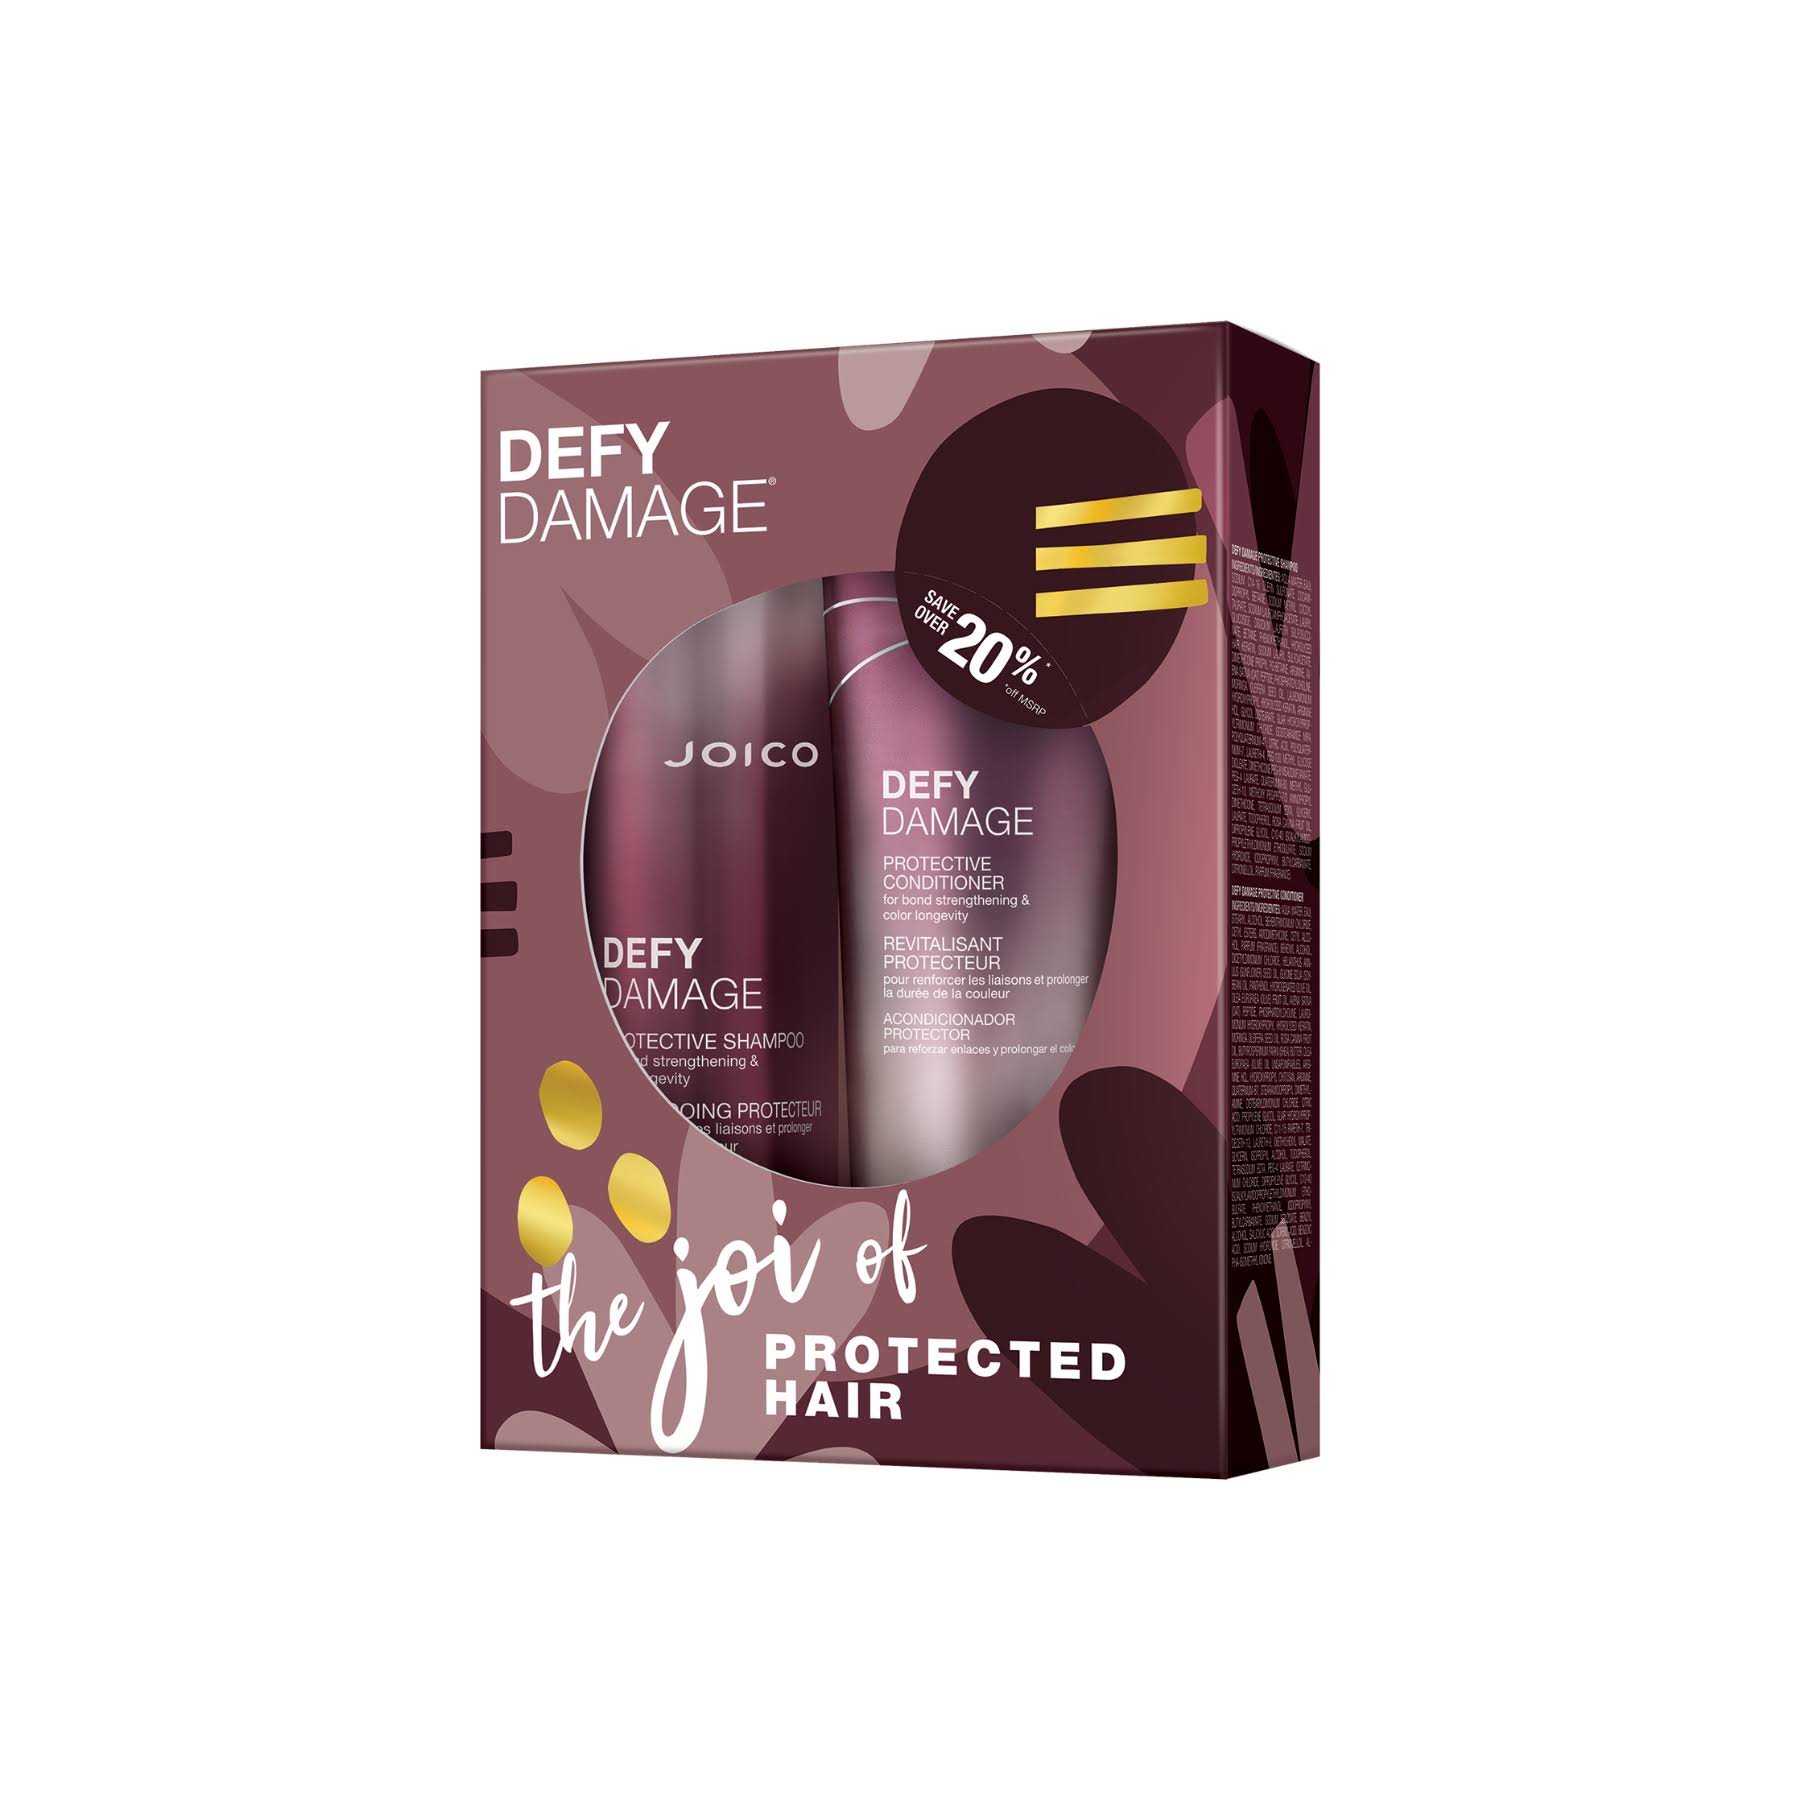 Joico Defy Damage Holiday Duo 2 Piece